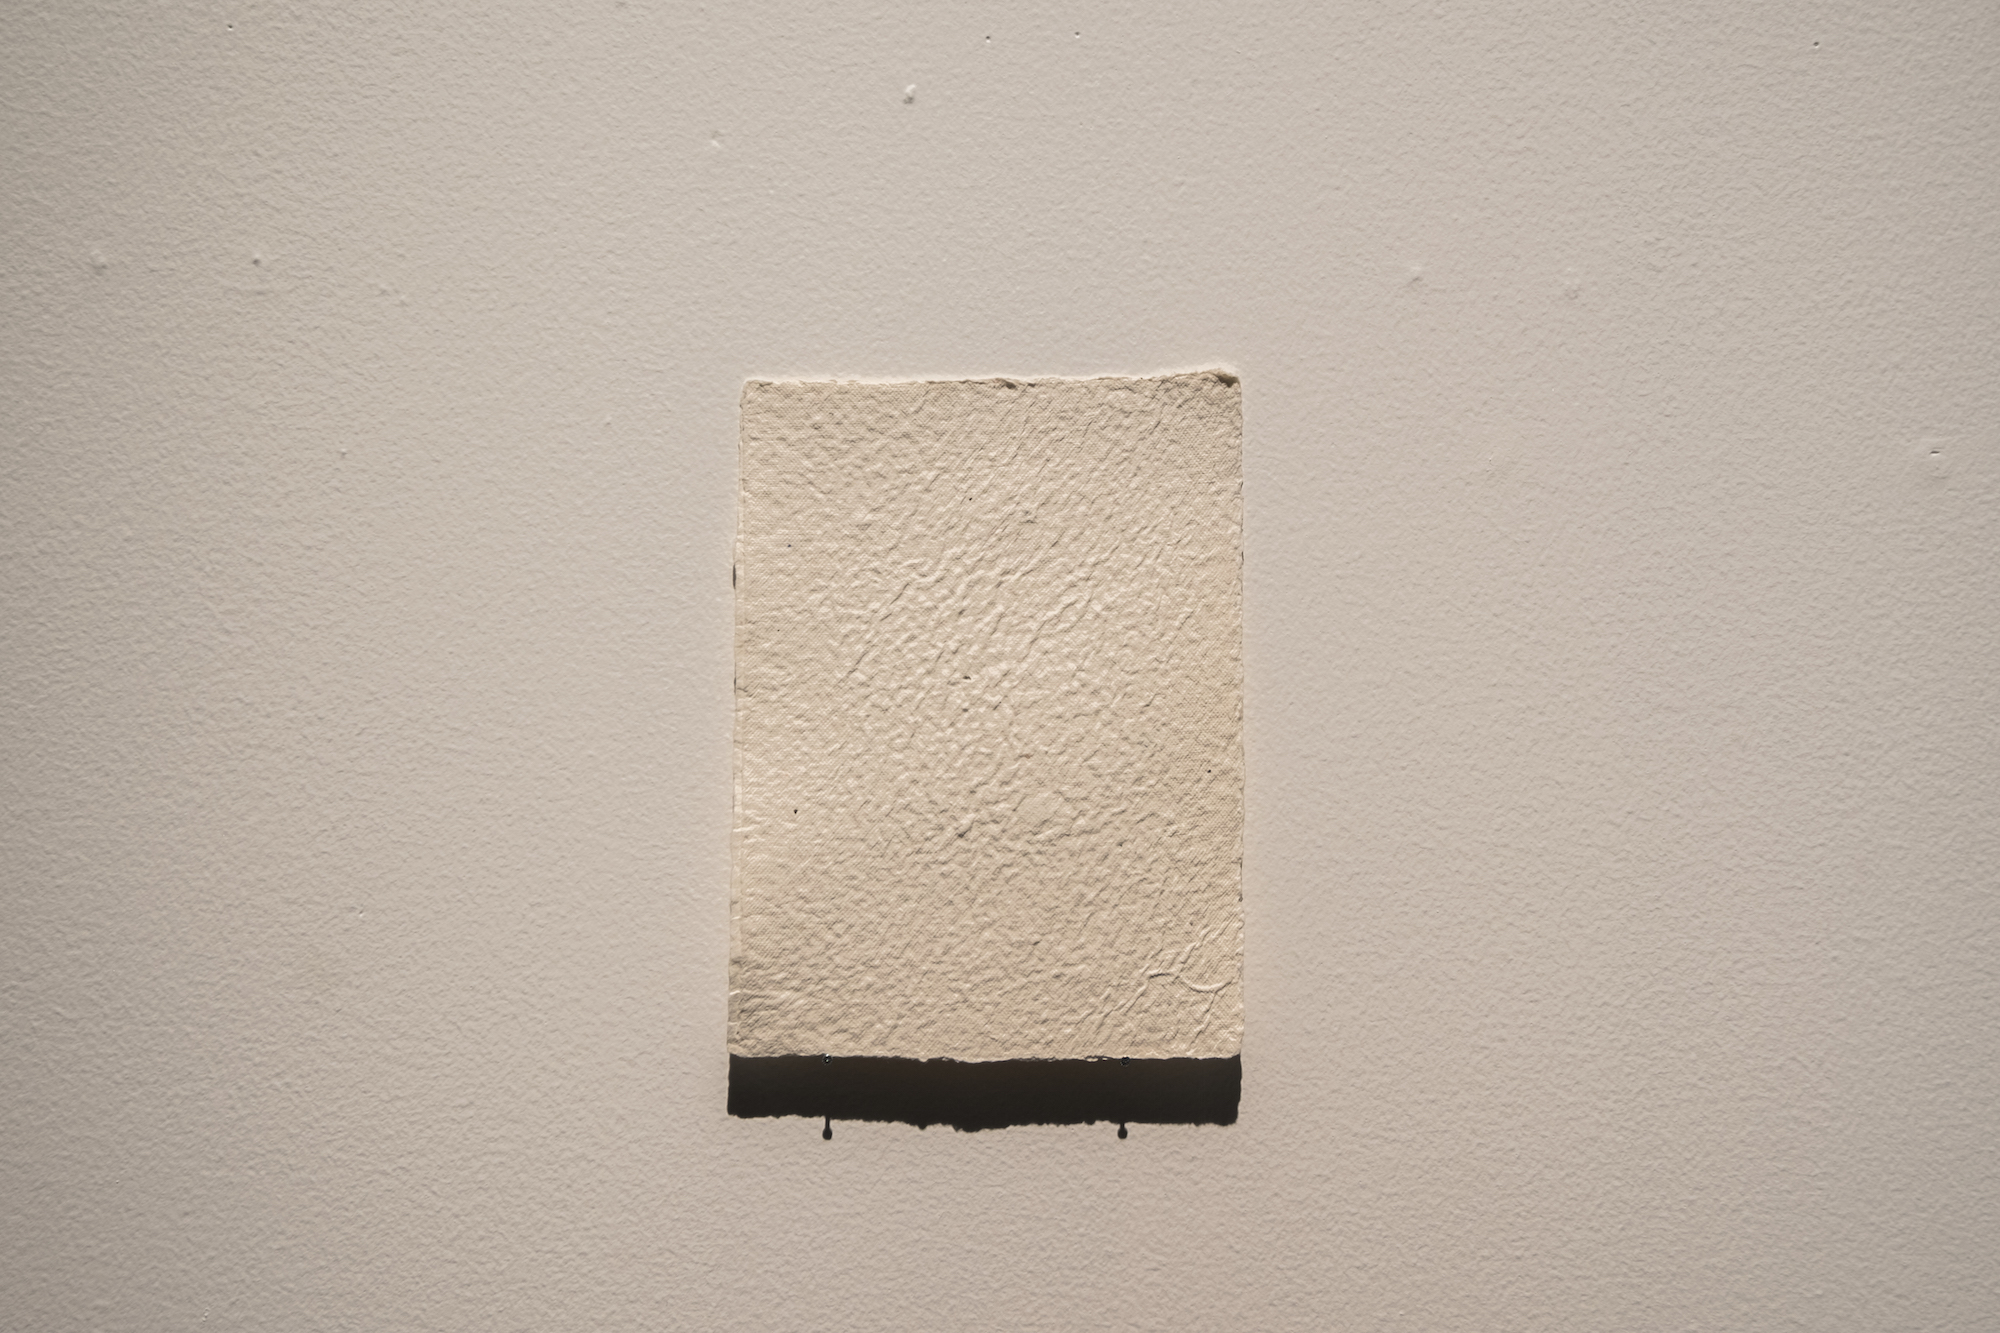  Paul Hage Boutros  Composition: Rimbaud 2017 Handmade paper 21 x 16 cm  Five poems by Arthur Rimbaud are sculpted into a single handmade paper. 